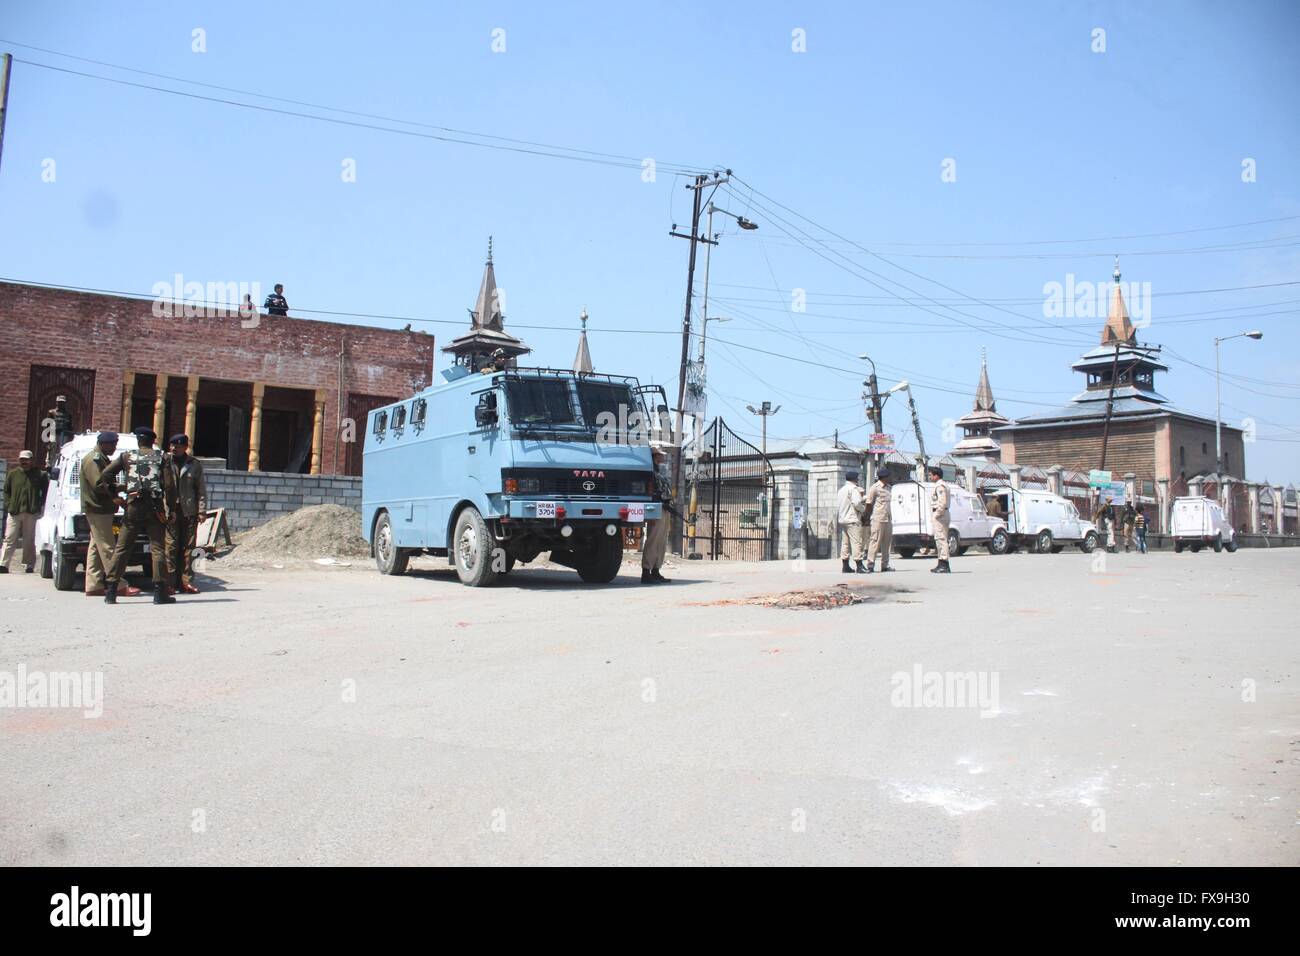 Srinagar, Kashmir. 13th April, 2016. Deserted View of Famous Mosque Jamia Masjid Srinagar during a Curfew against the killings of two youths and 1 woman in Handwara district Credit:  Basit zargar/Alamy Live News Stock Photo